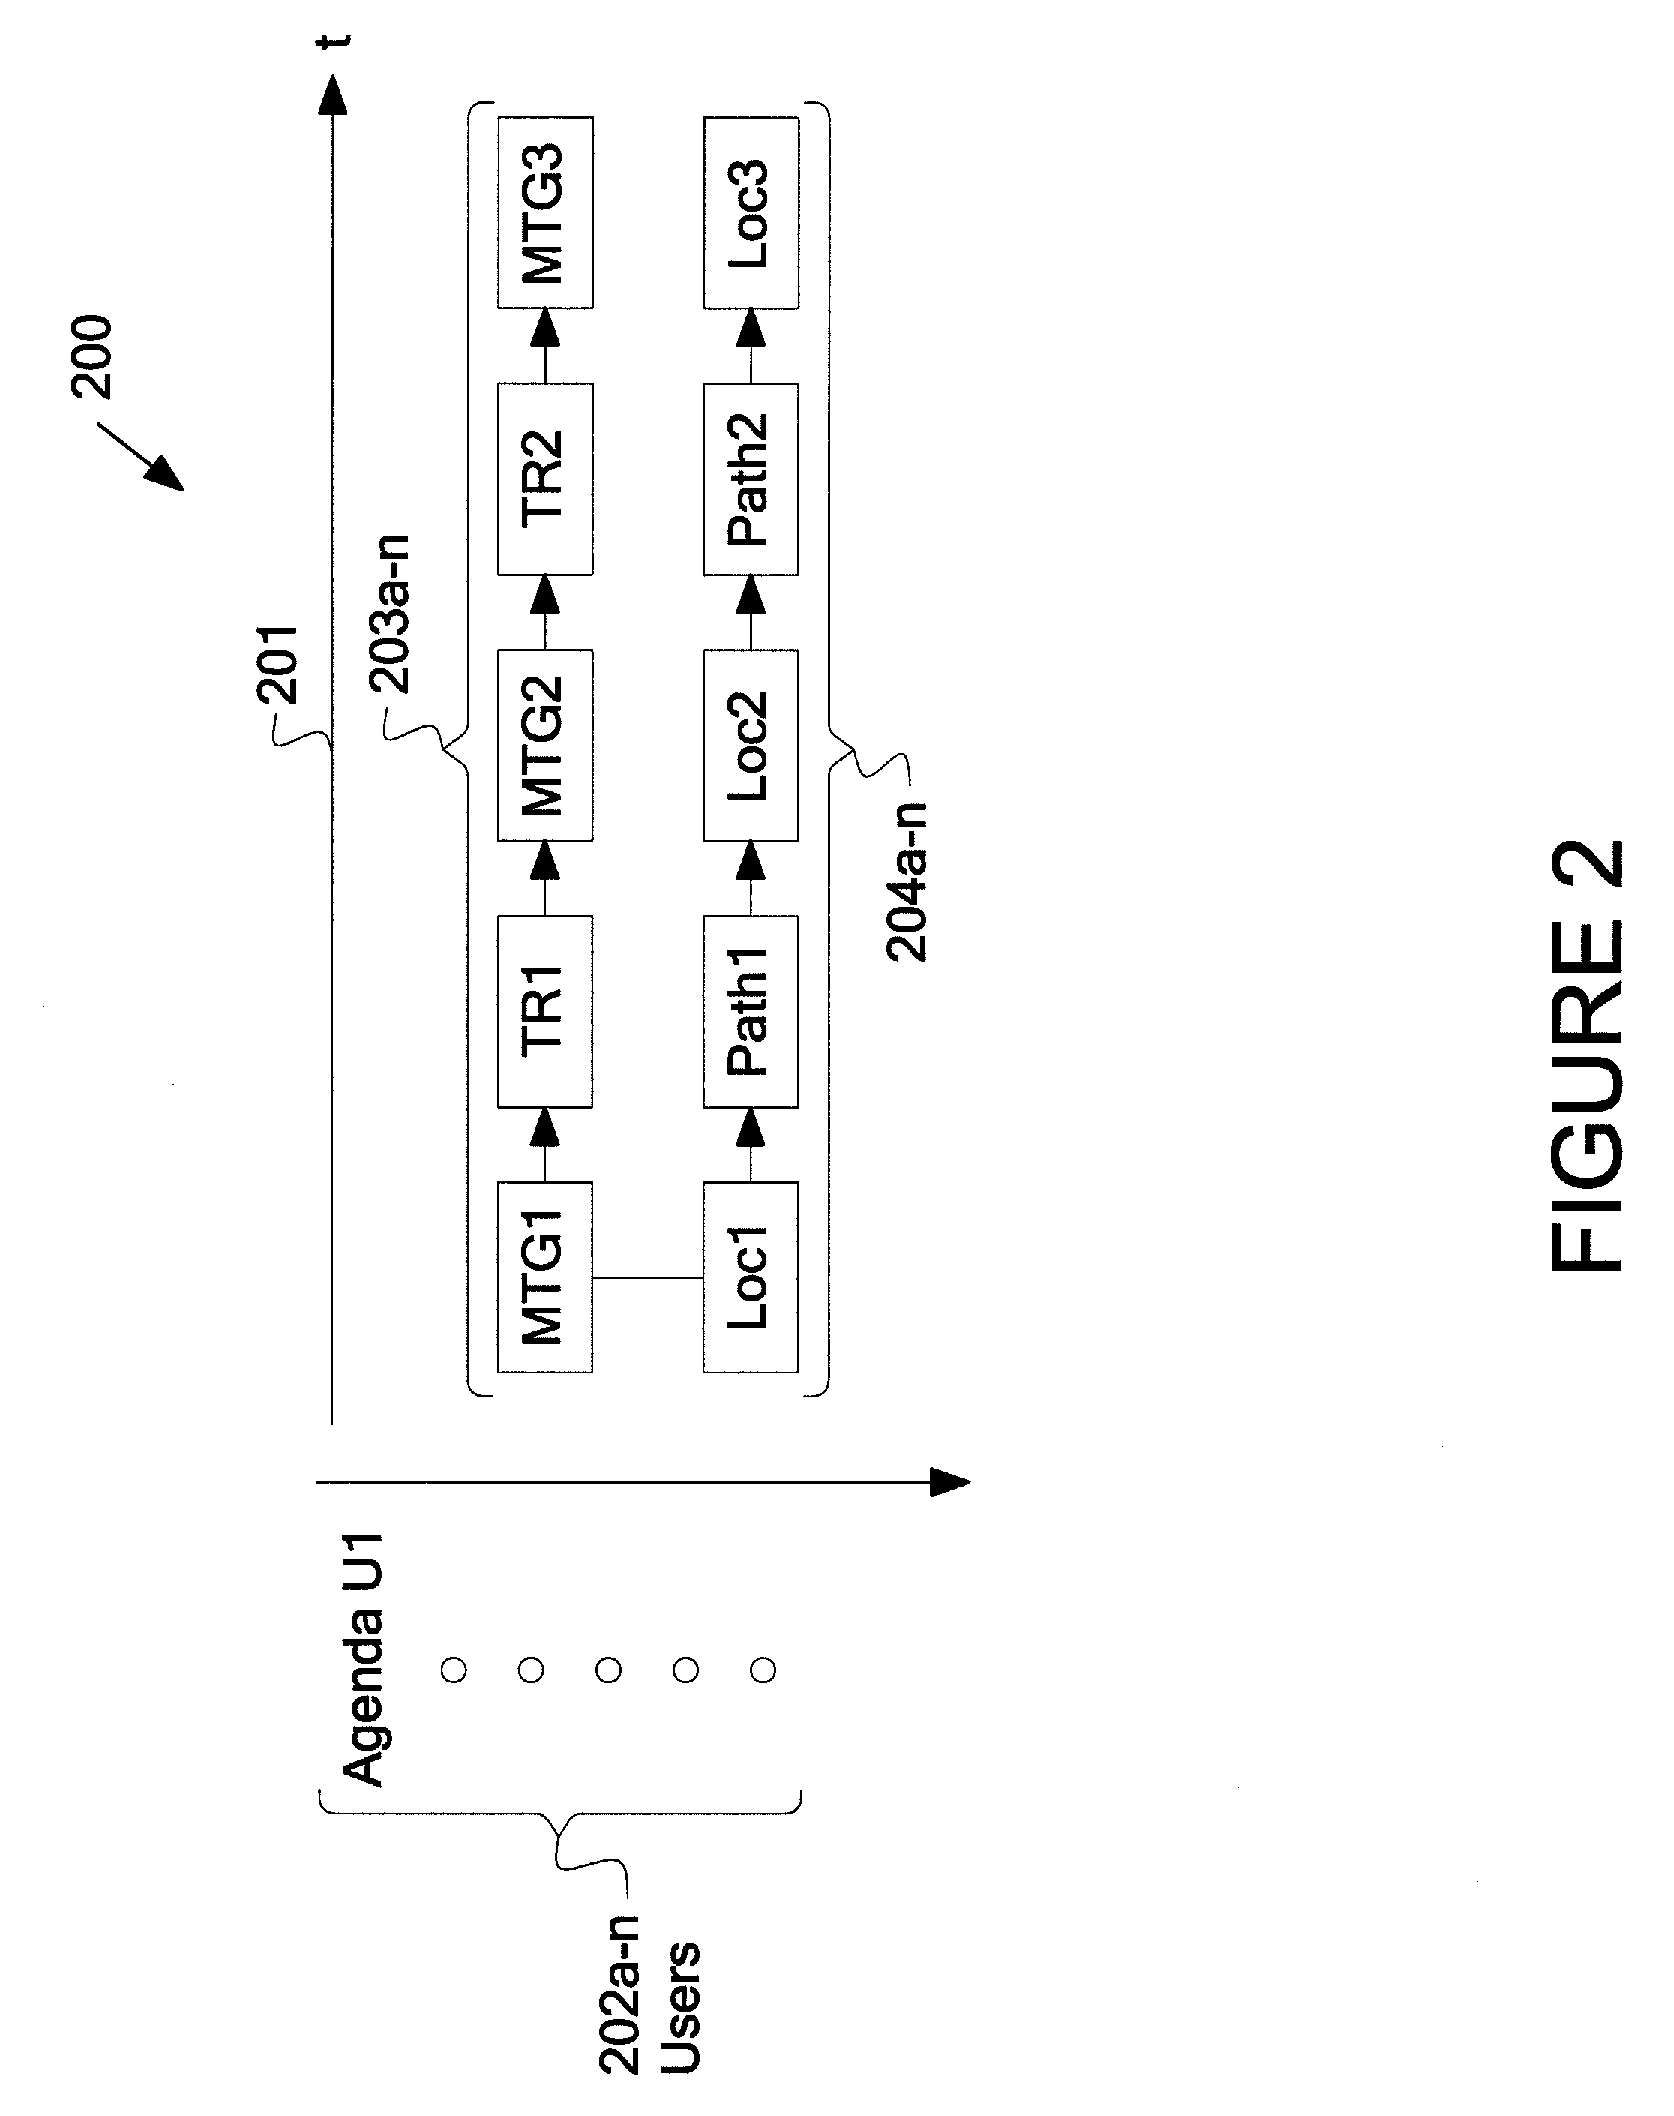 System and Method for Interactive Natural Language Rebooking or Rescheduling of Calendar Activities